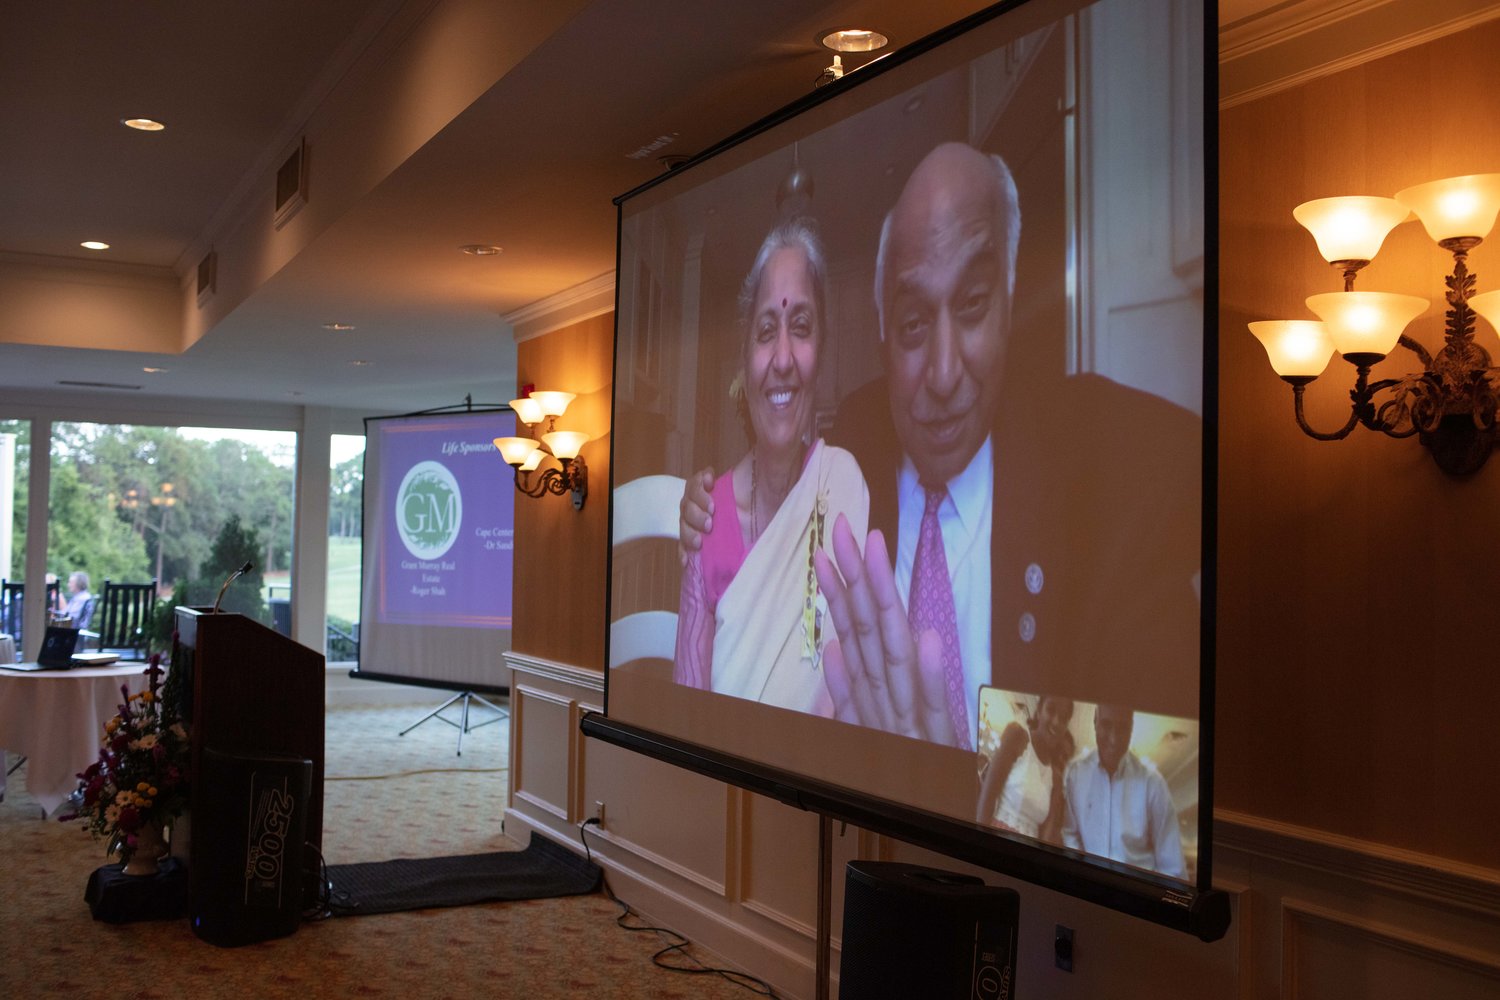 Dr. Rakesh Gupta and Dr. Vinita Gupta were honored at the Cumberland County Boy Scouts of America Occoneechee Council’s annual Distinguished Citizen Award Dinner on Aug. 18, 2022, at Highland Country Club.